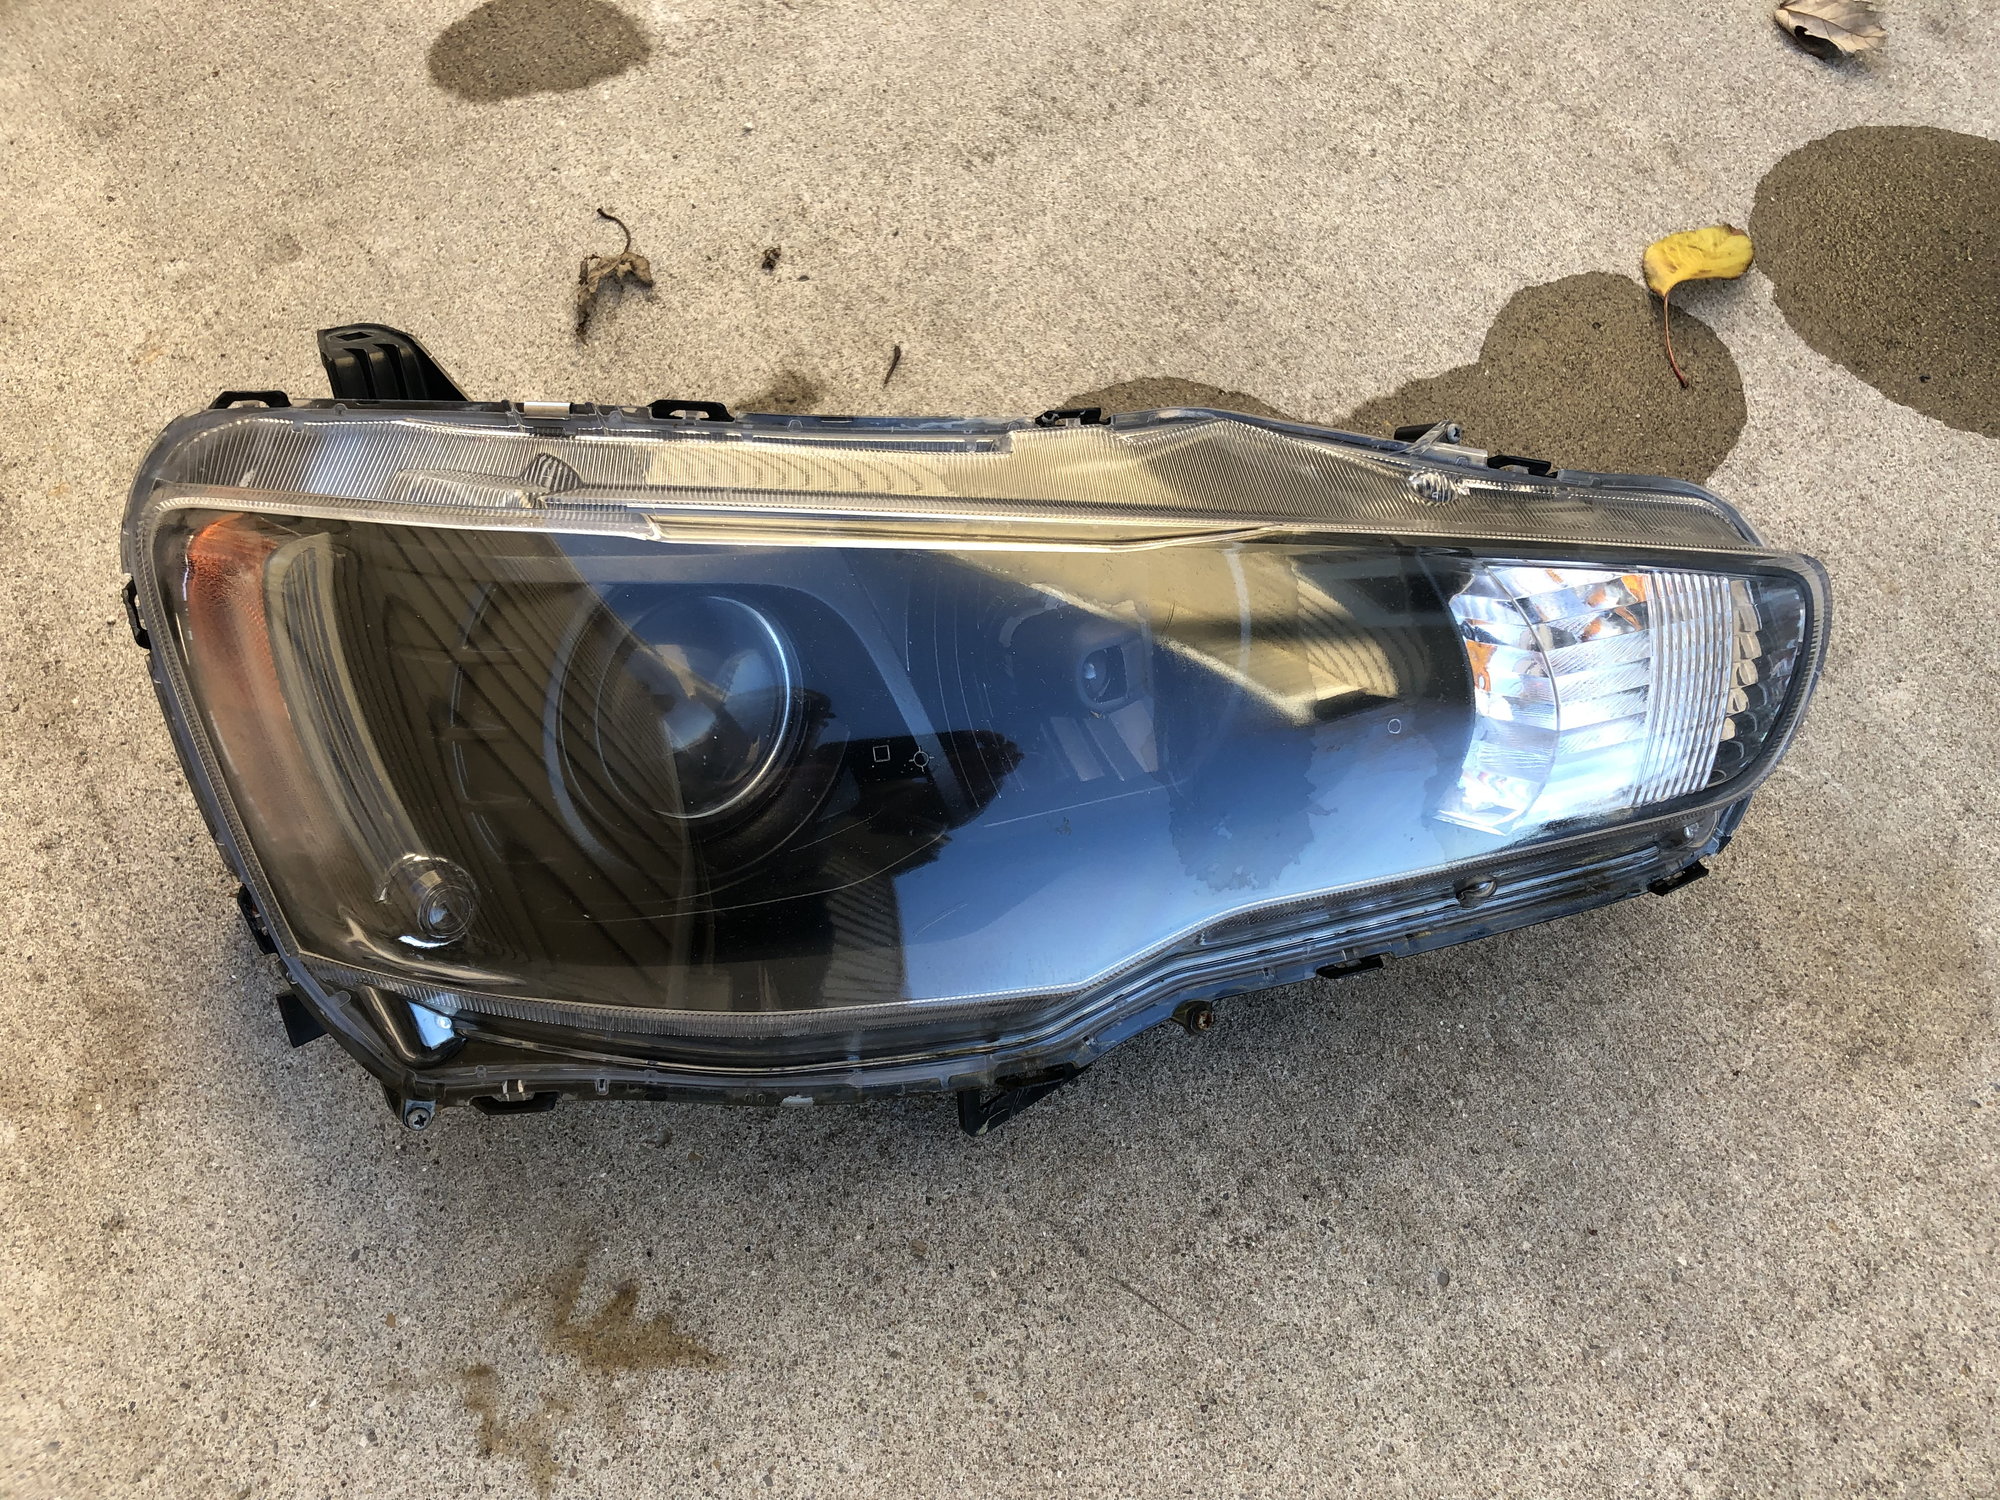 Exterior Body Parts - Oem hid headlamps and others - Used - Bowling Green, OH 43402, United States